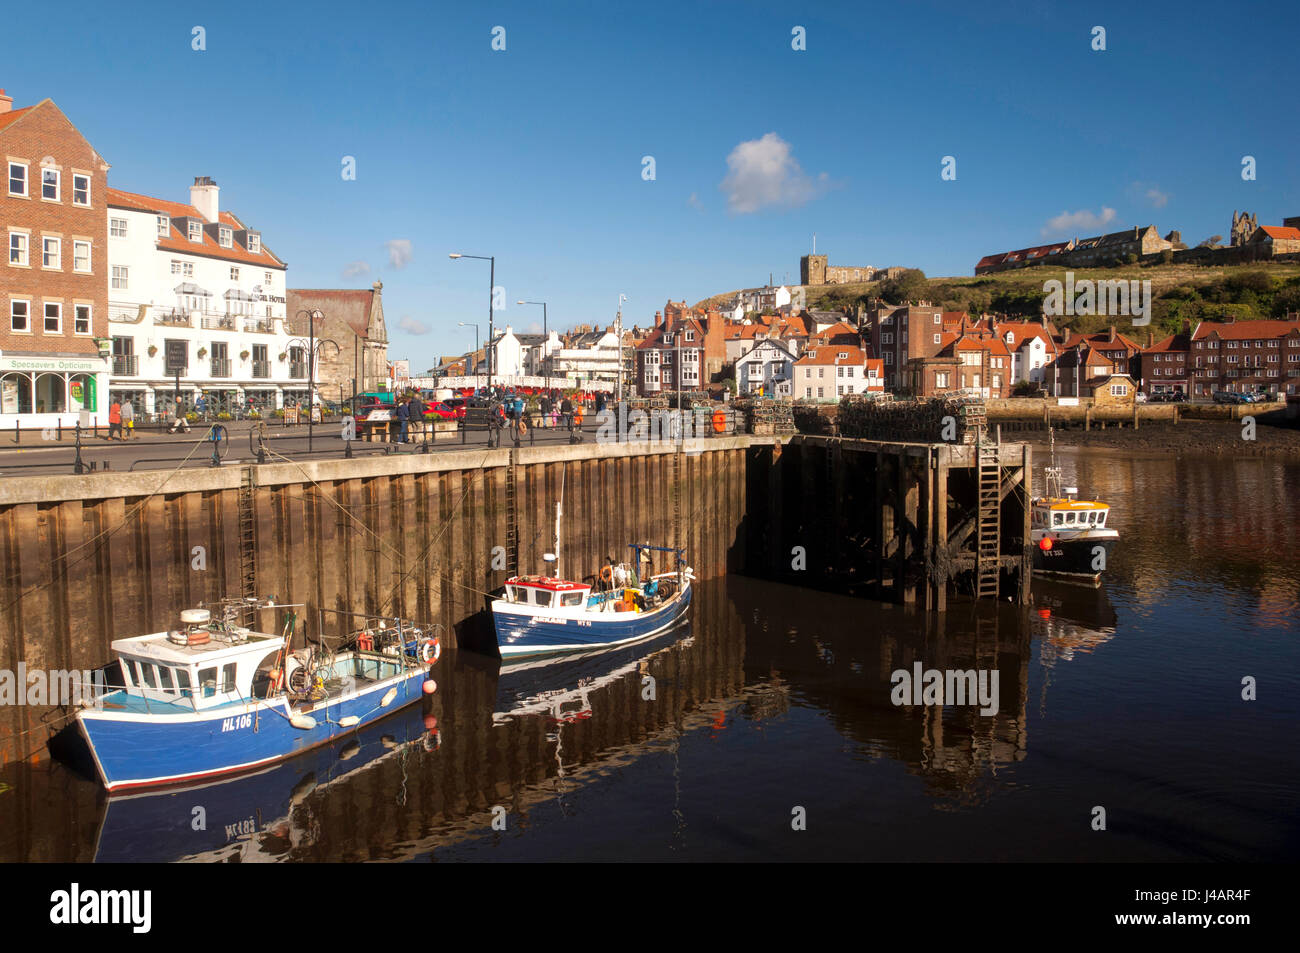 The seaside town of Whitby with the Gothic Whitby Abbey on the hilltop above the town. Yorkshire, England. Stock Photo